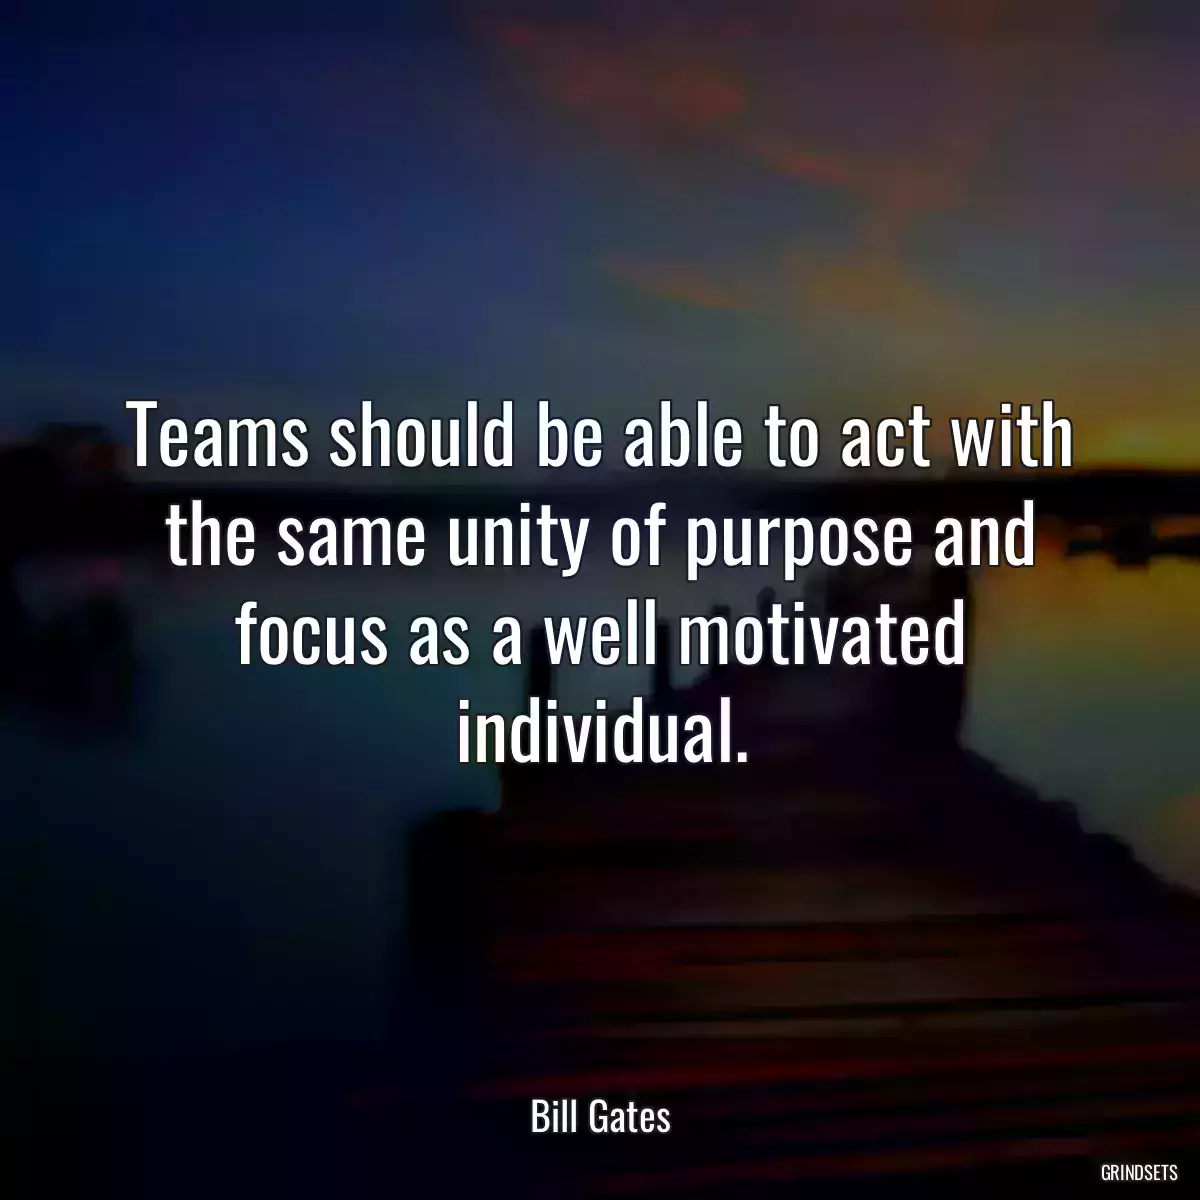 Teams should be able to act with the same unity of purpose and focus as a well motivated individual.